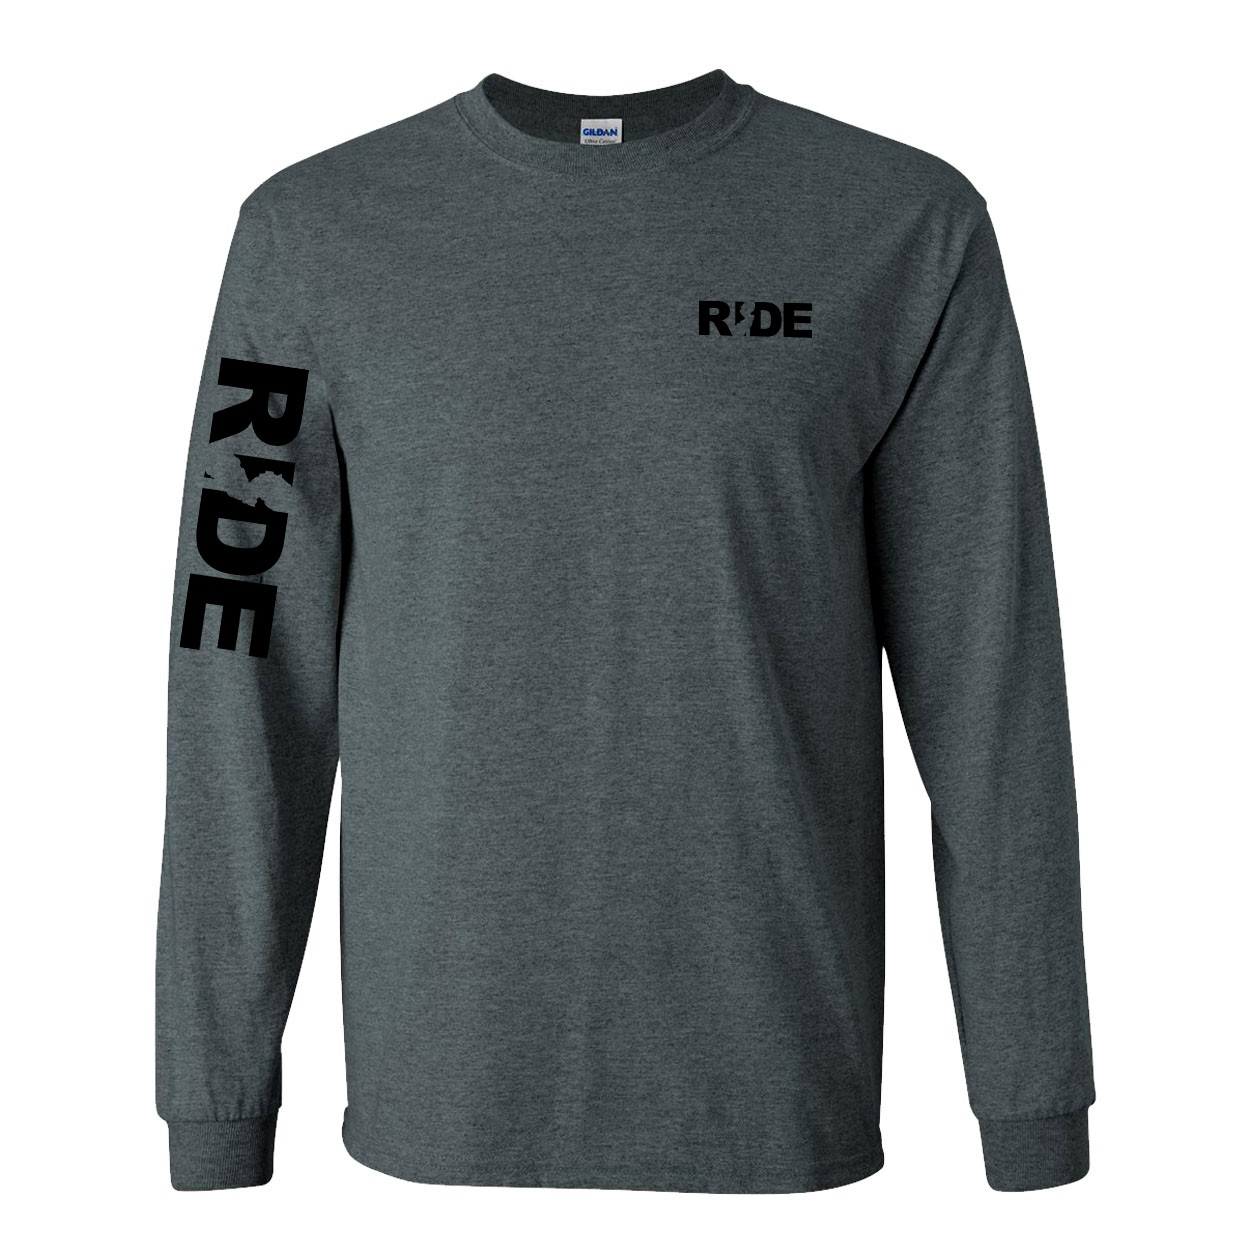 Ride New Jersey Night Out Long Sleeve T-Shirt with Arm Logo Dark Heather Gray (Black Logo)